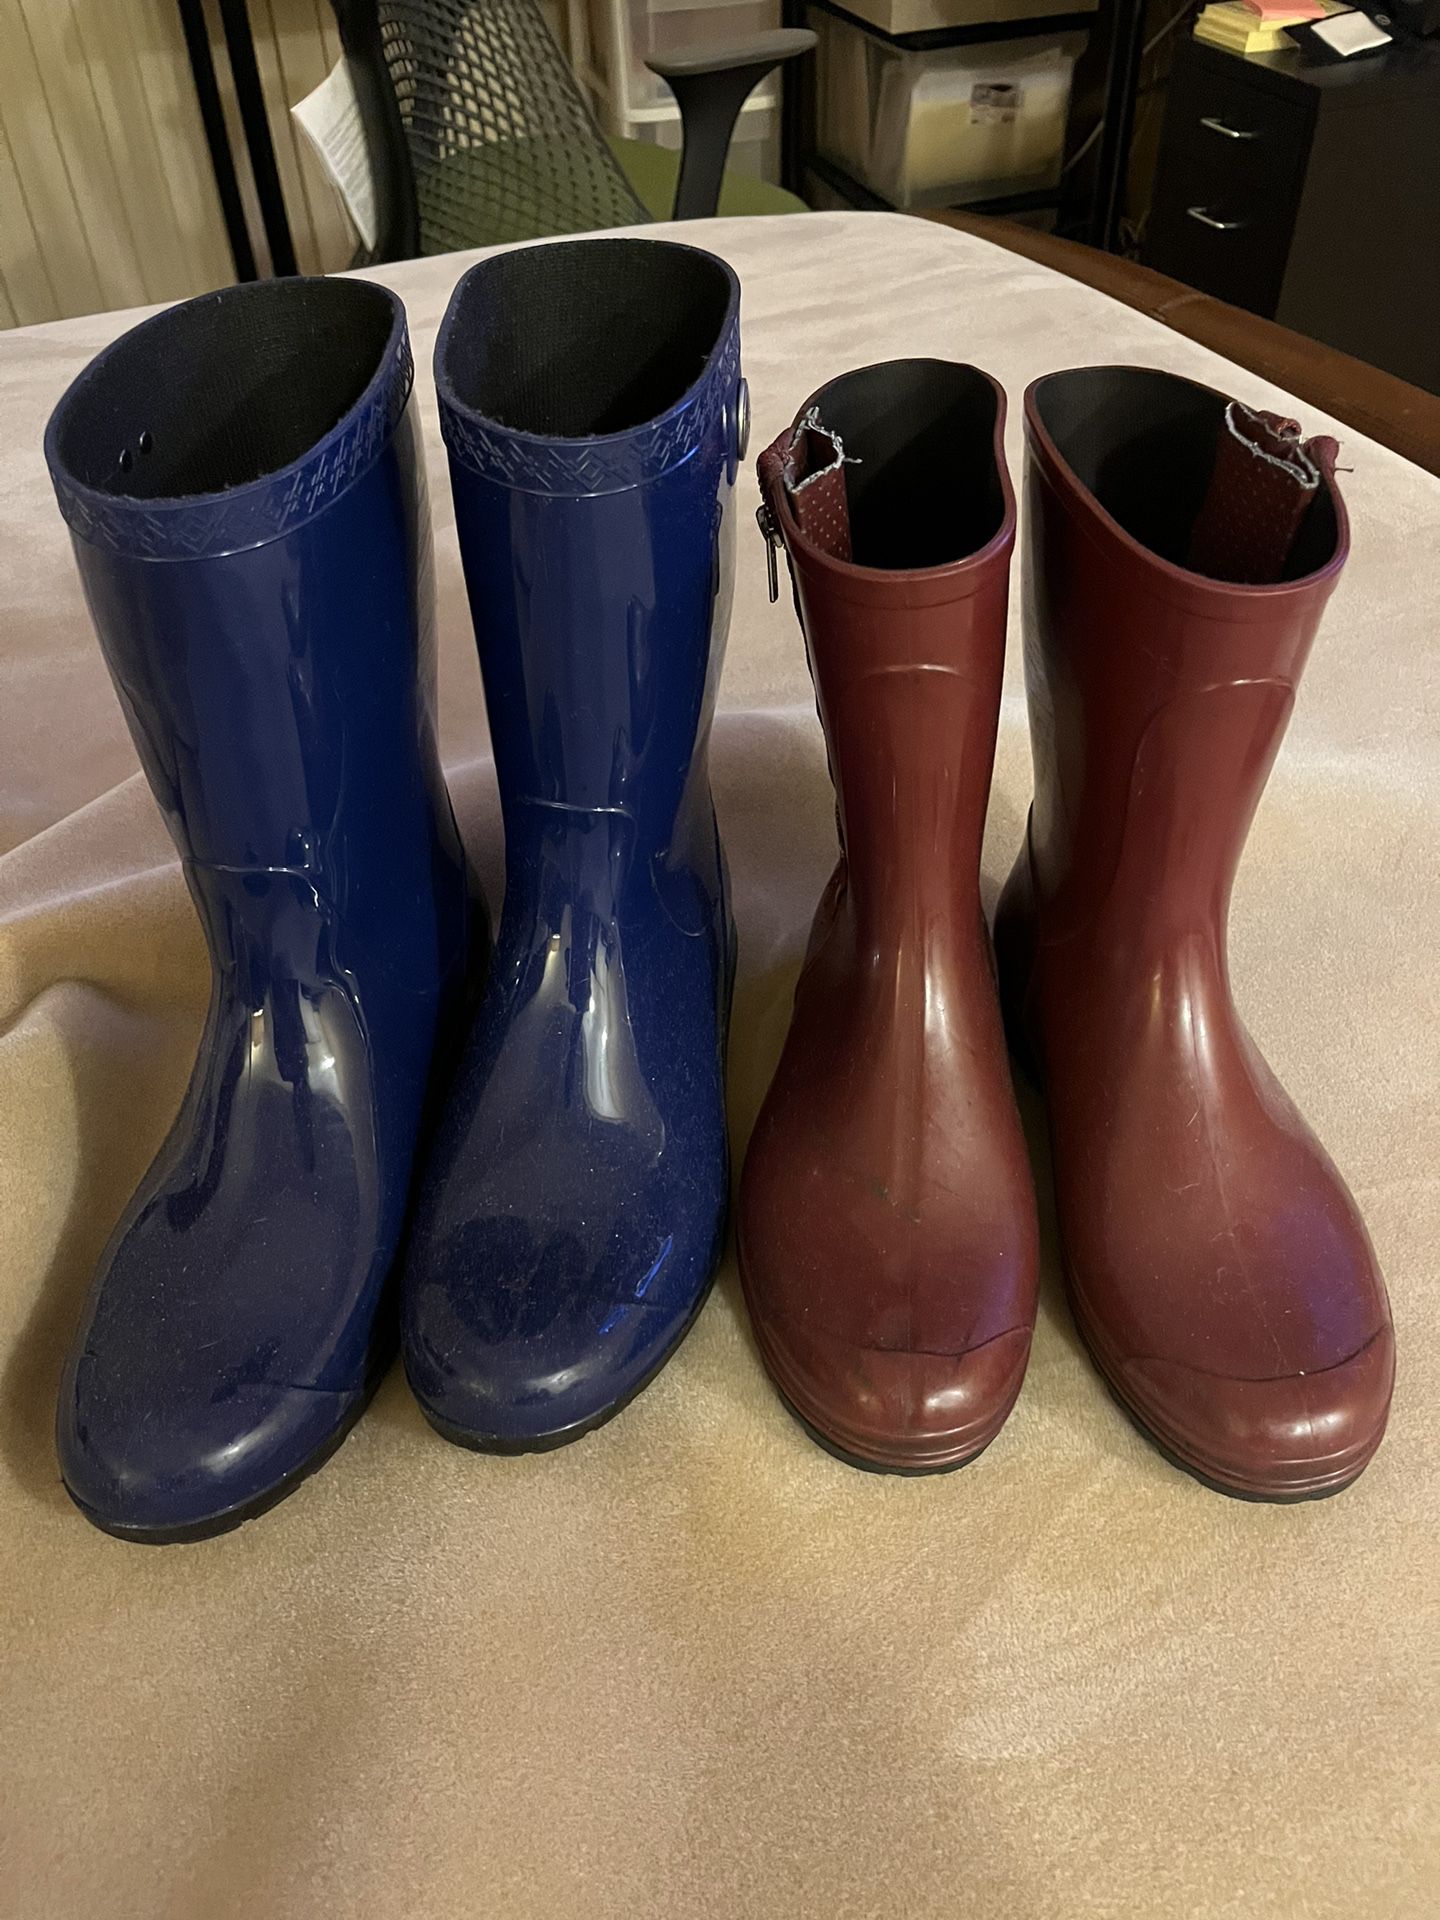 Rainboots Fit Size 8  Uggs And One Other 